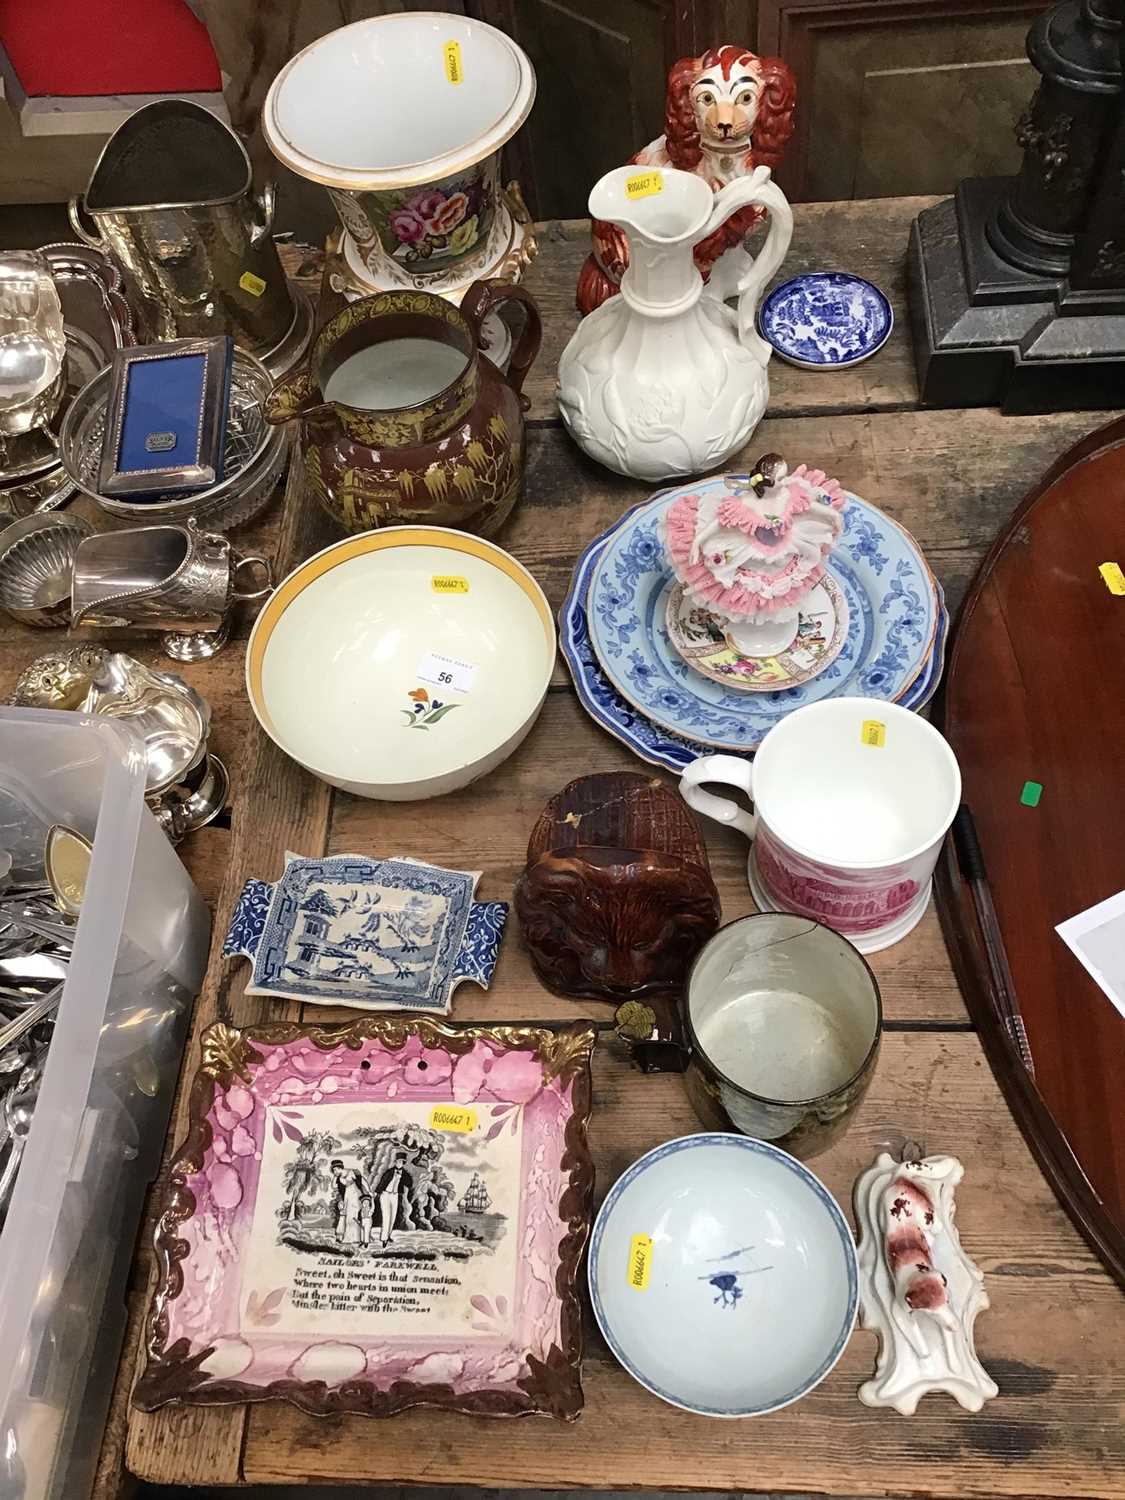 Lot 56 - Good collection of 18th and 19th century ceramics, including Worcester bowl, Crown Derby vase, pearlware bowl, Sunderland lustre plaque, English delftware plate, Staffordshire reclining dog, etc